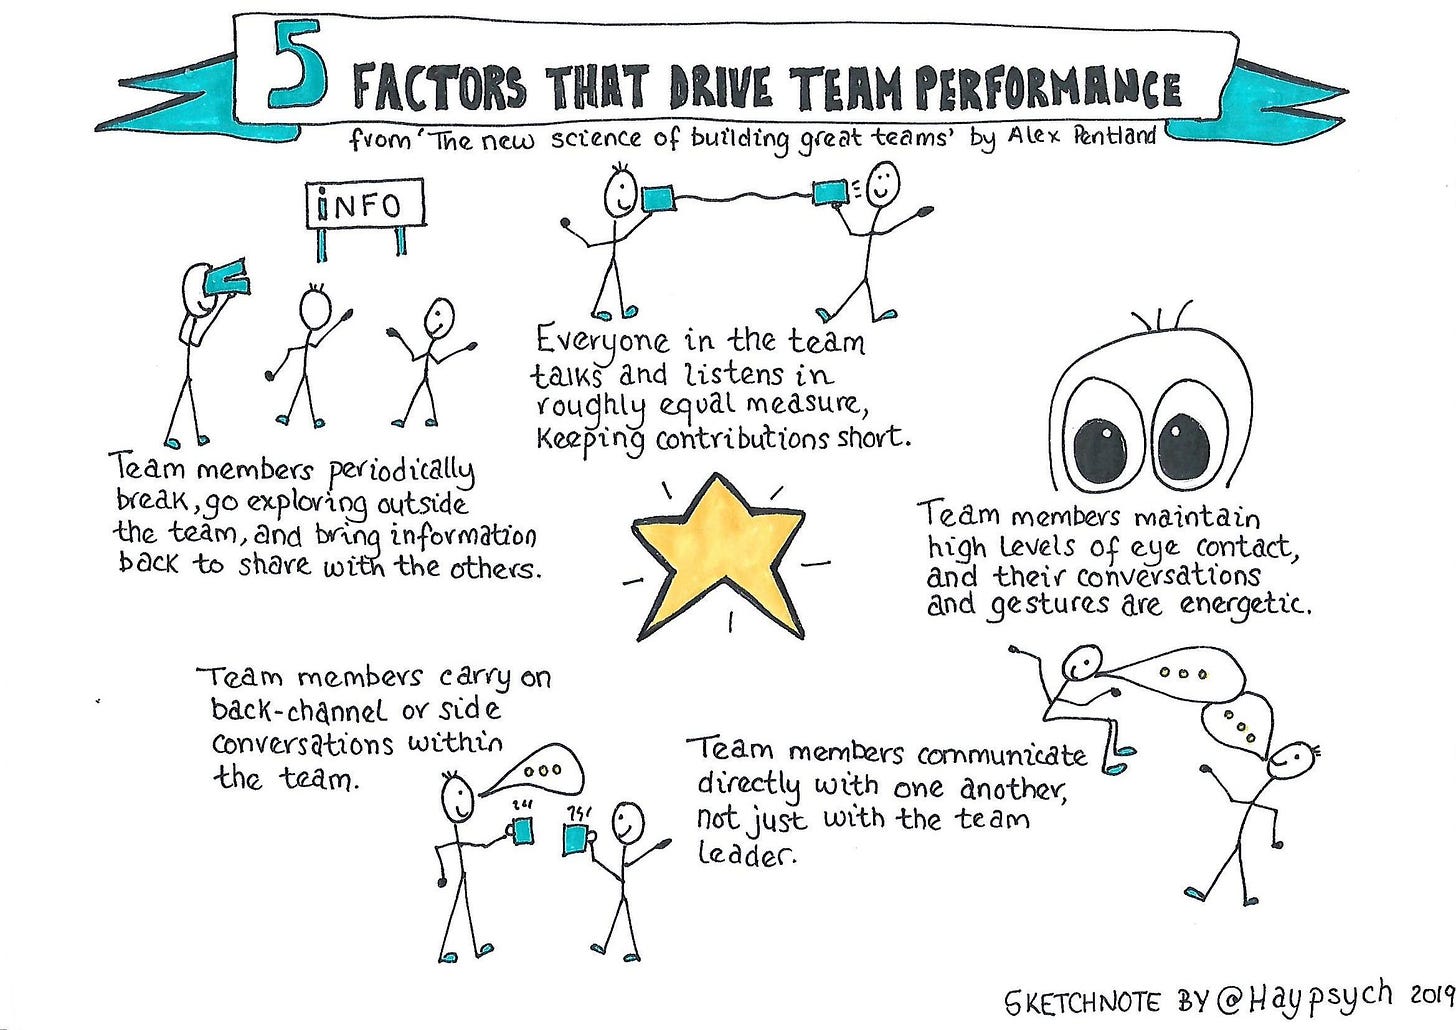 Hayley Lewis 💙 on Twitter: "This sketchnote shows the five key things we  typically see in high-performing teams. These factors come from the work of  Alex Pentland, the director of MIT's Human